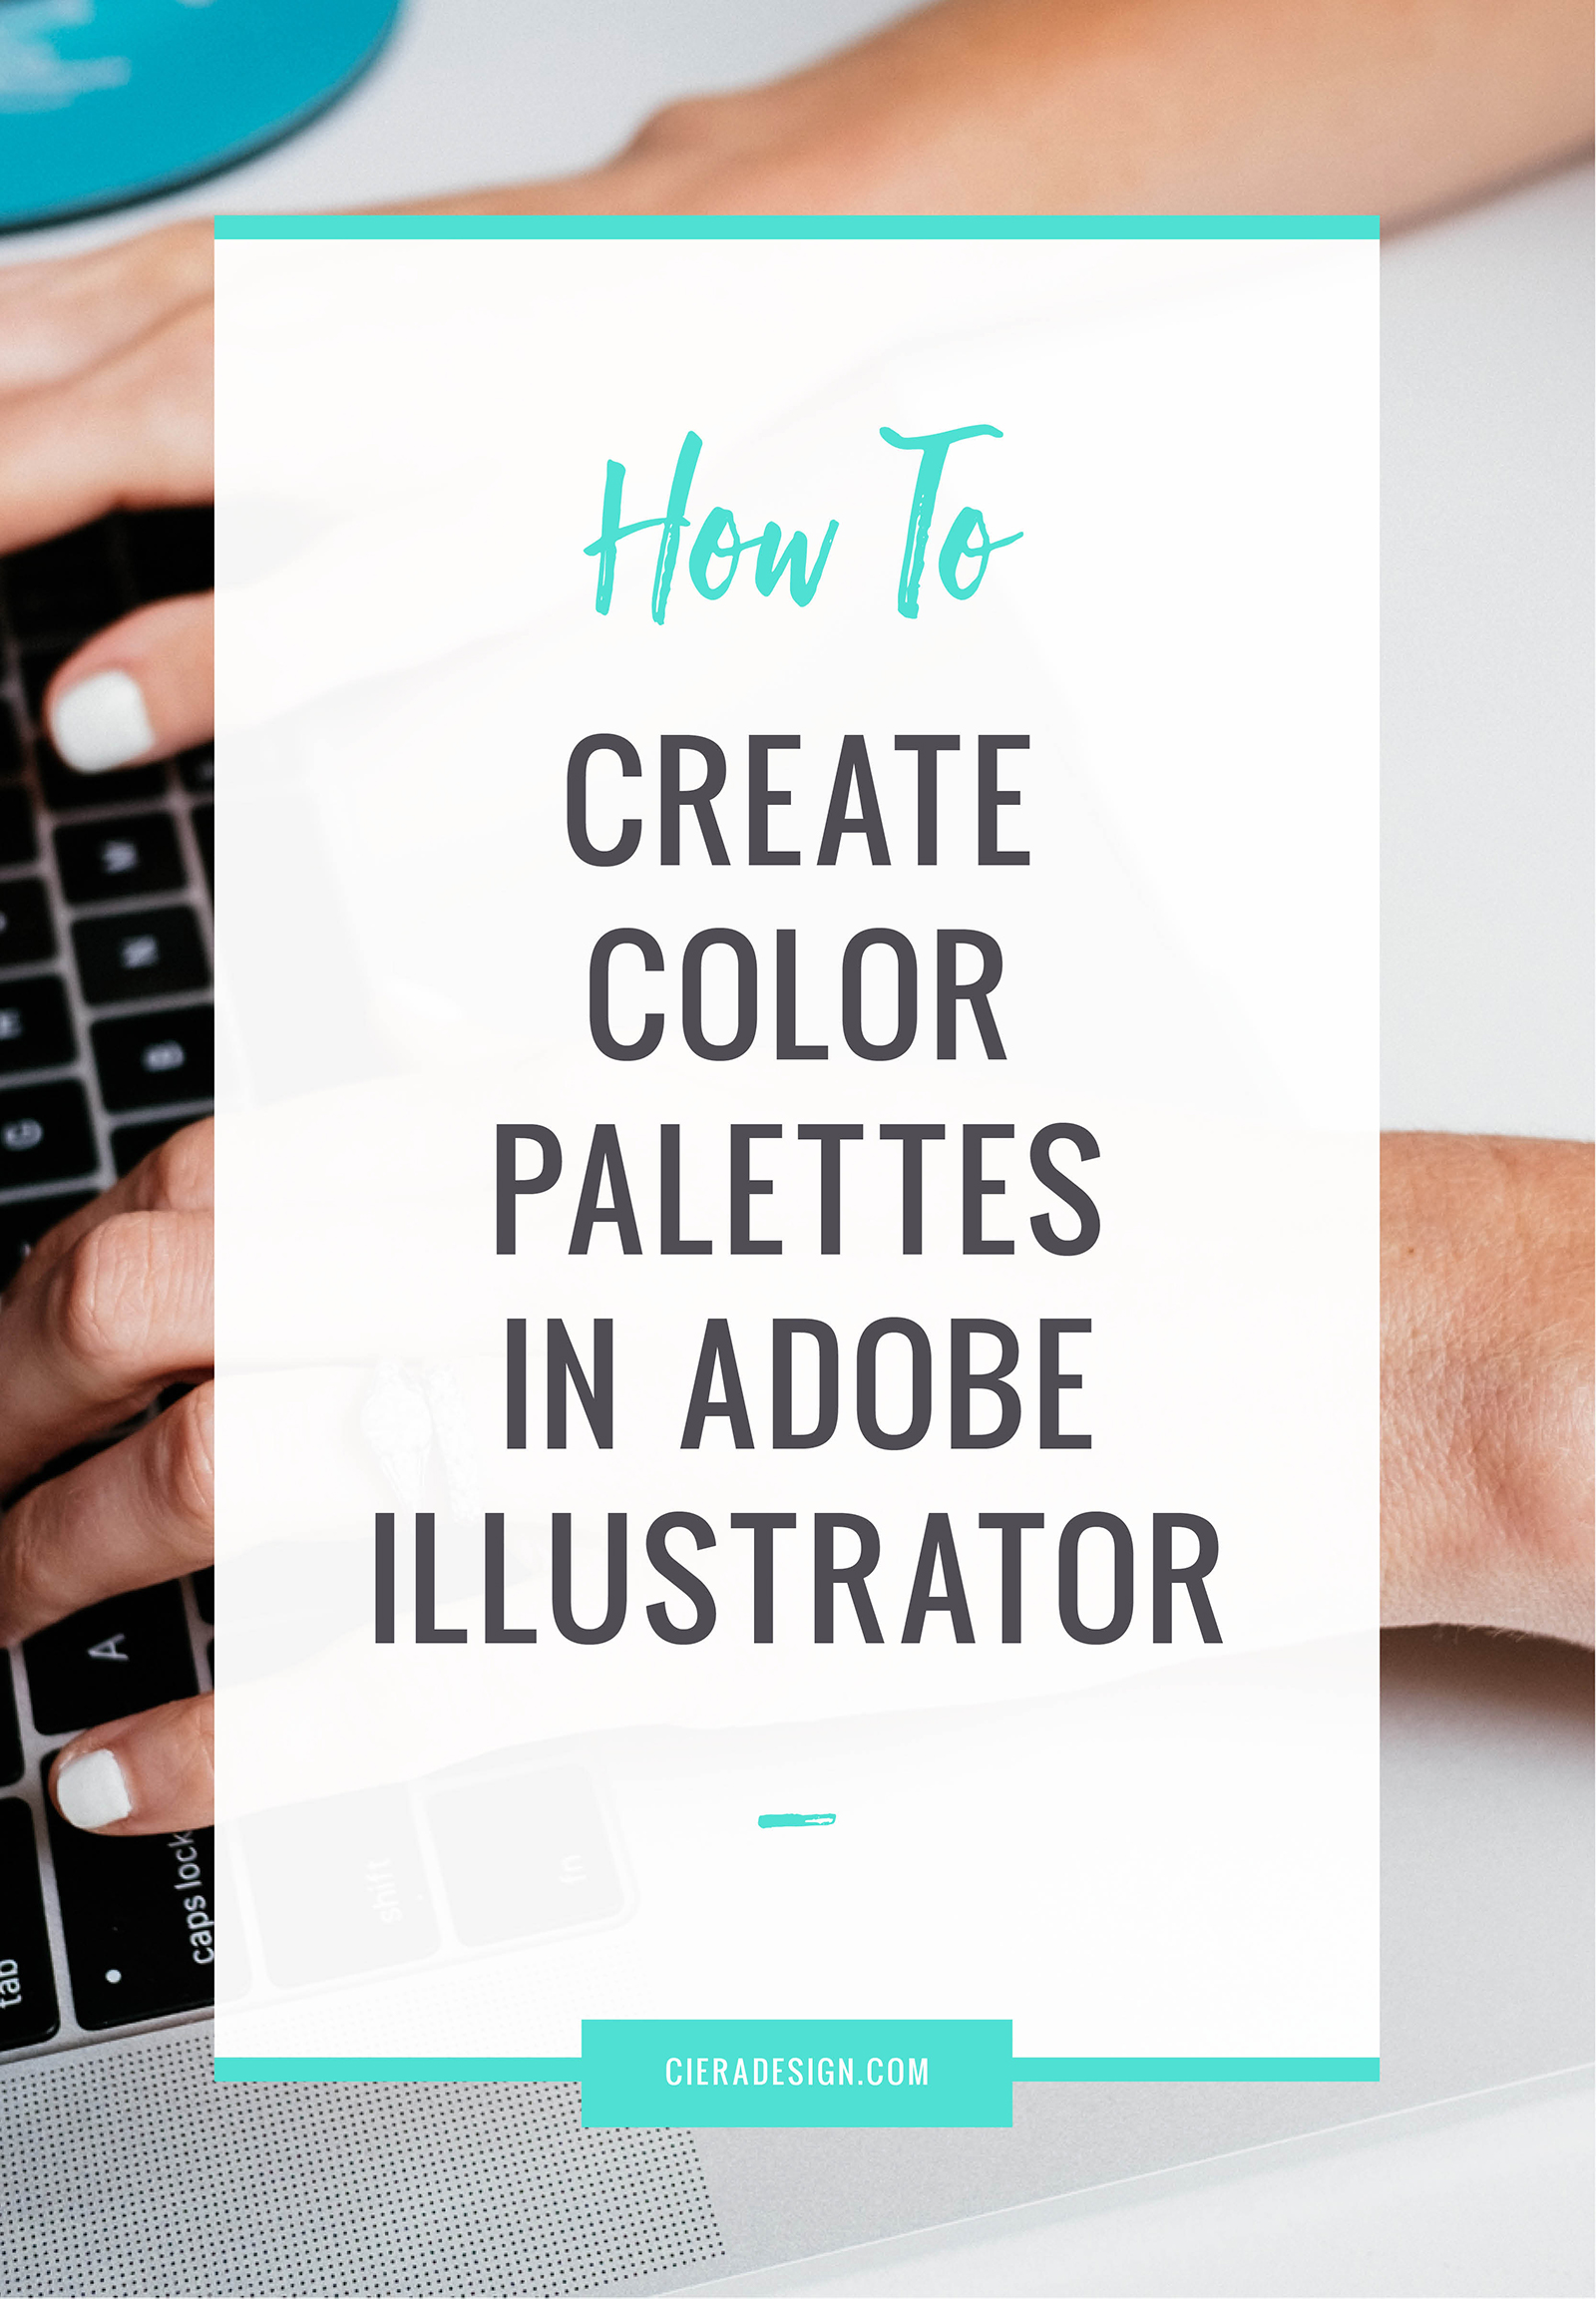 How to Create Color Palettes in Adobe Illustrator